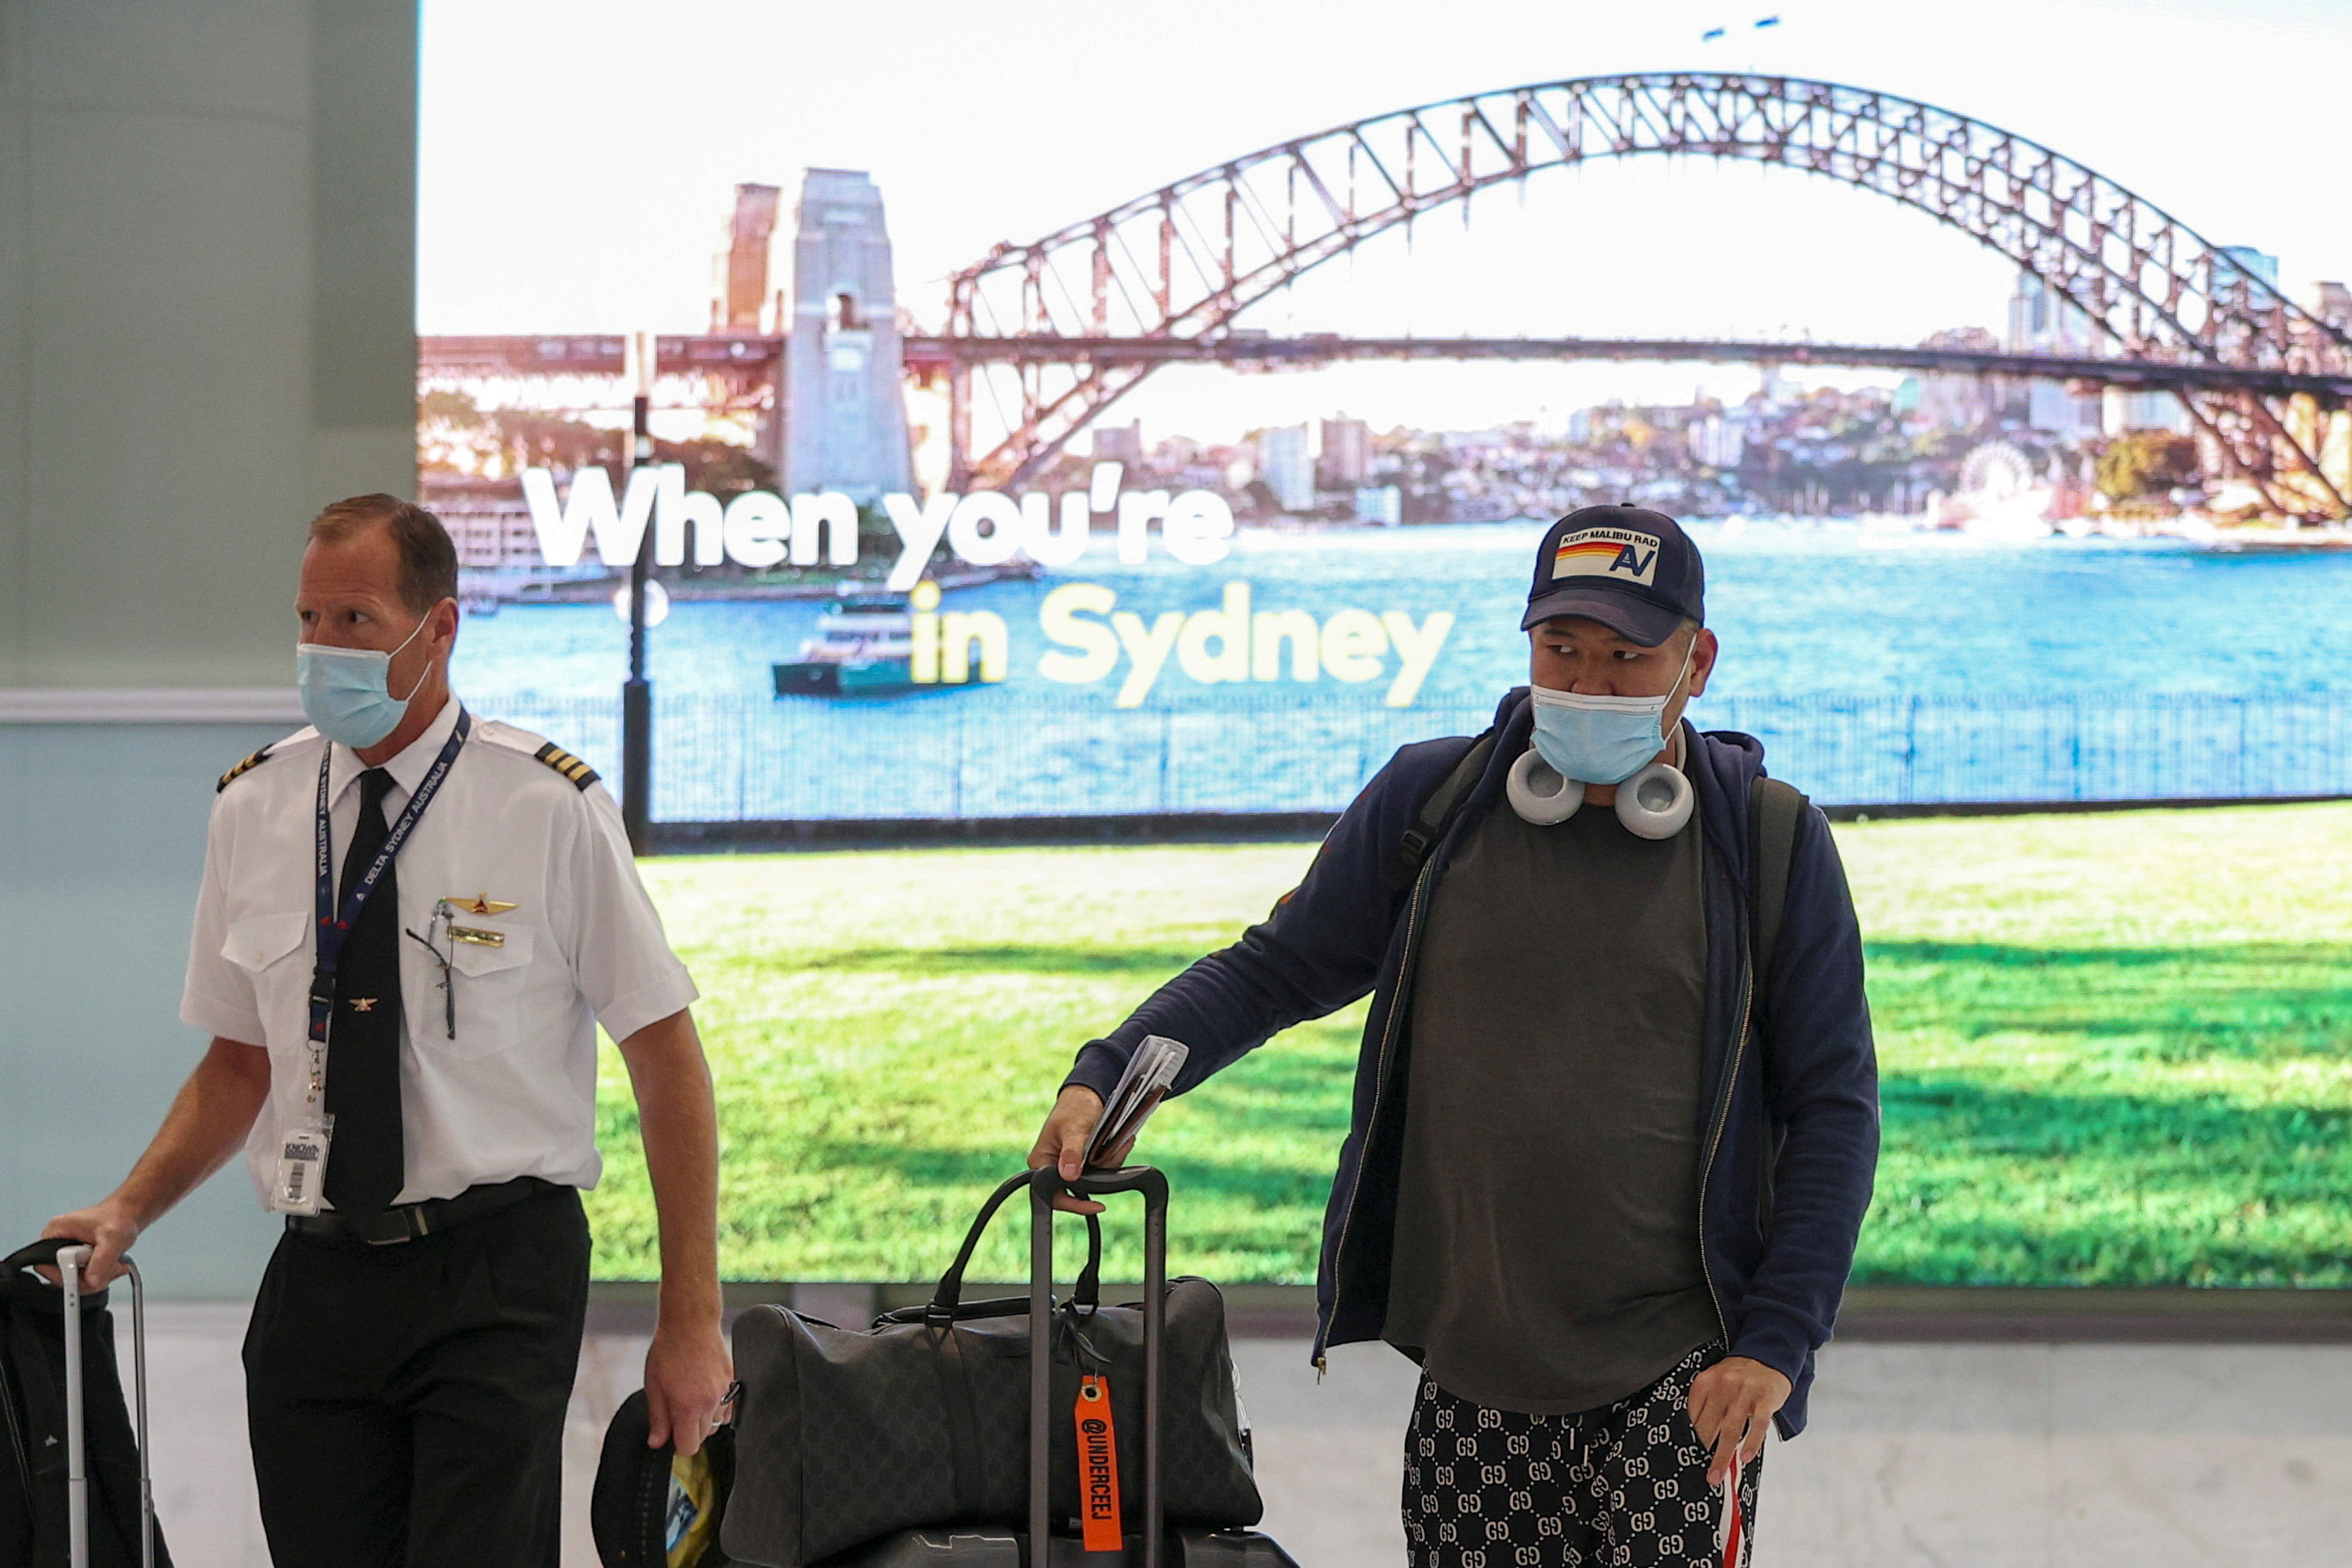 Arrivals at the international terminal at Sydney Airport as countries react to the new coronavirus Omicron variant